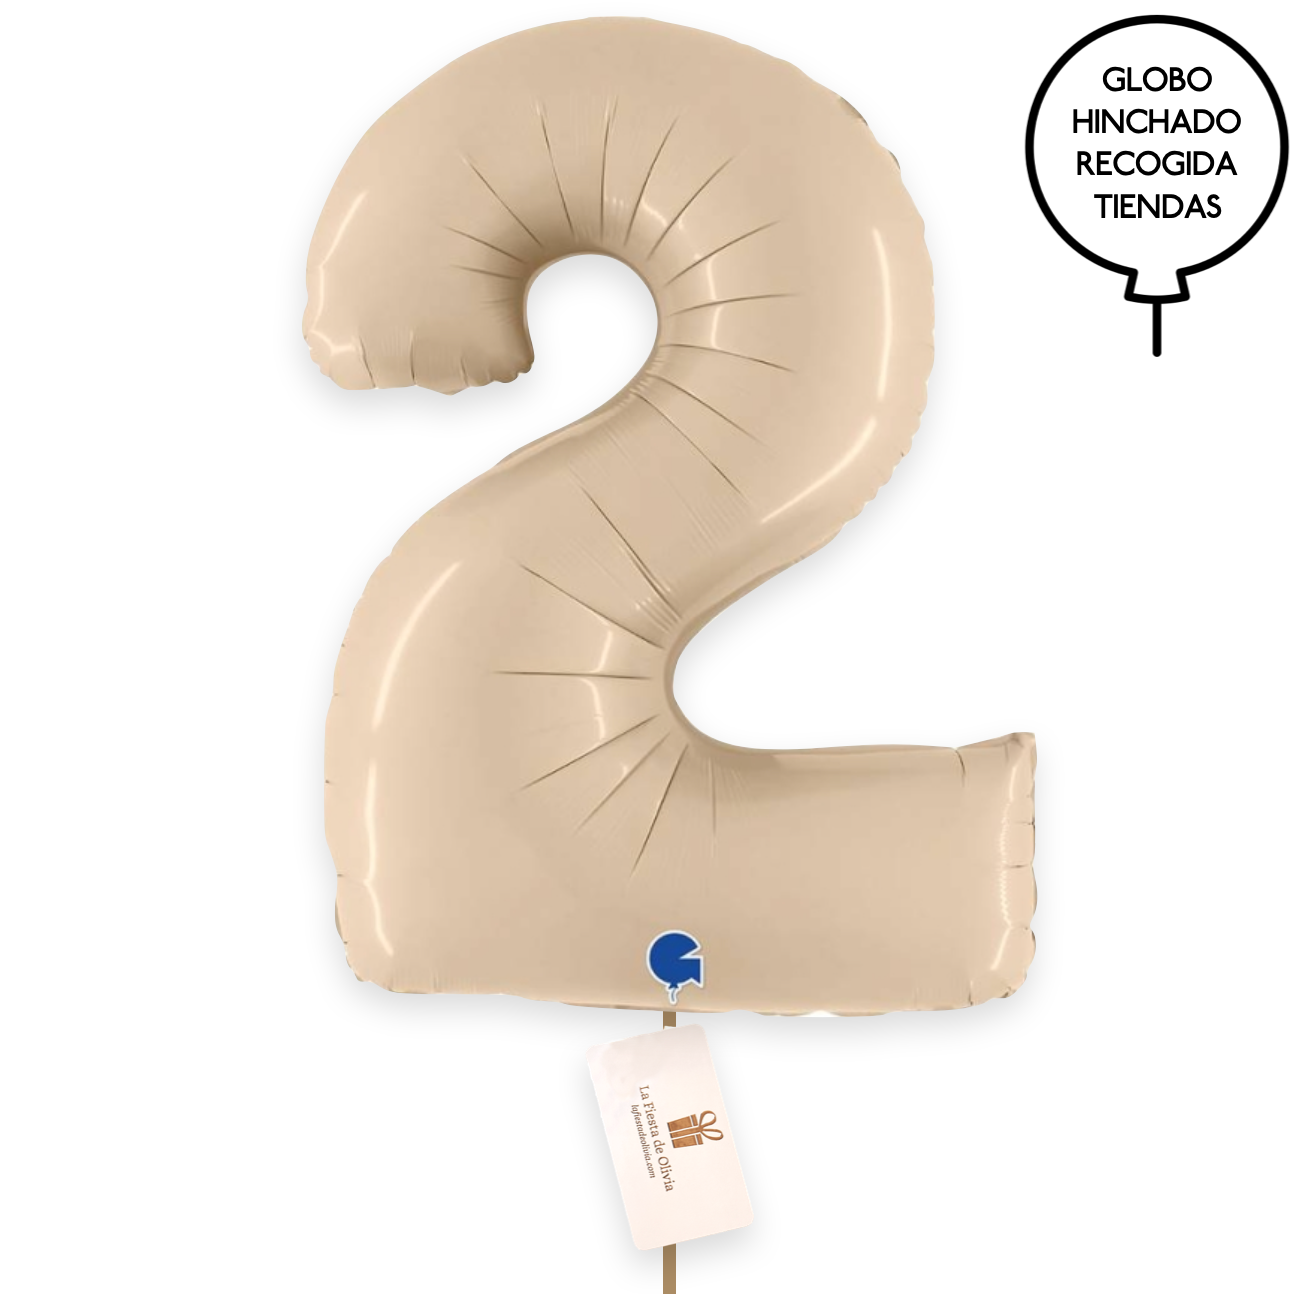 Matte ivory number balloons inflated with XL PREMIUM helium